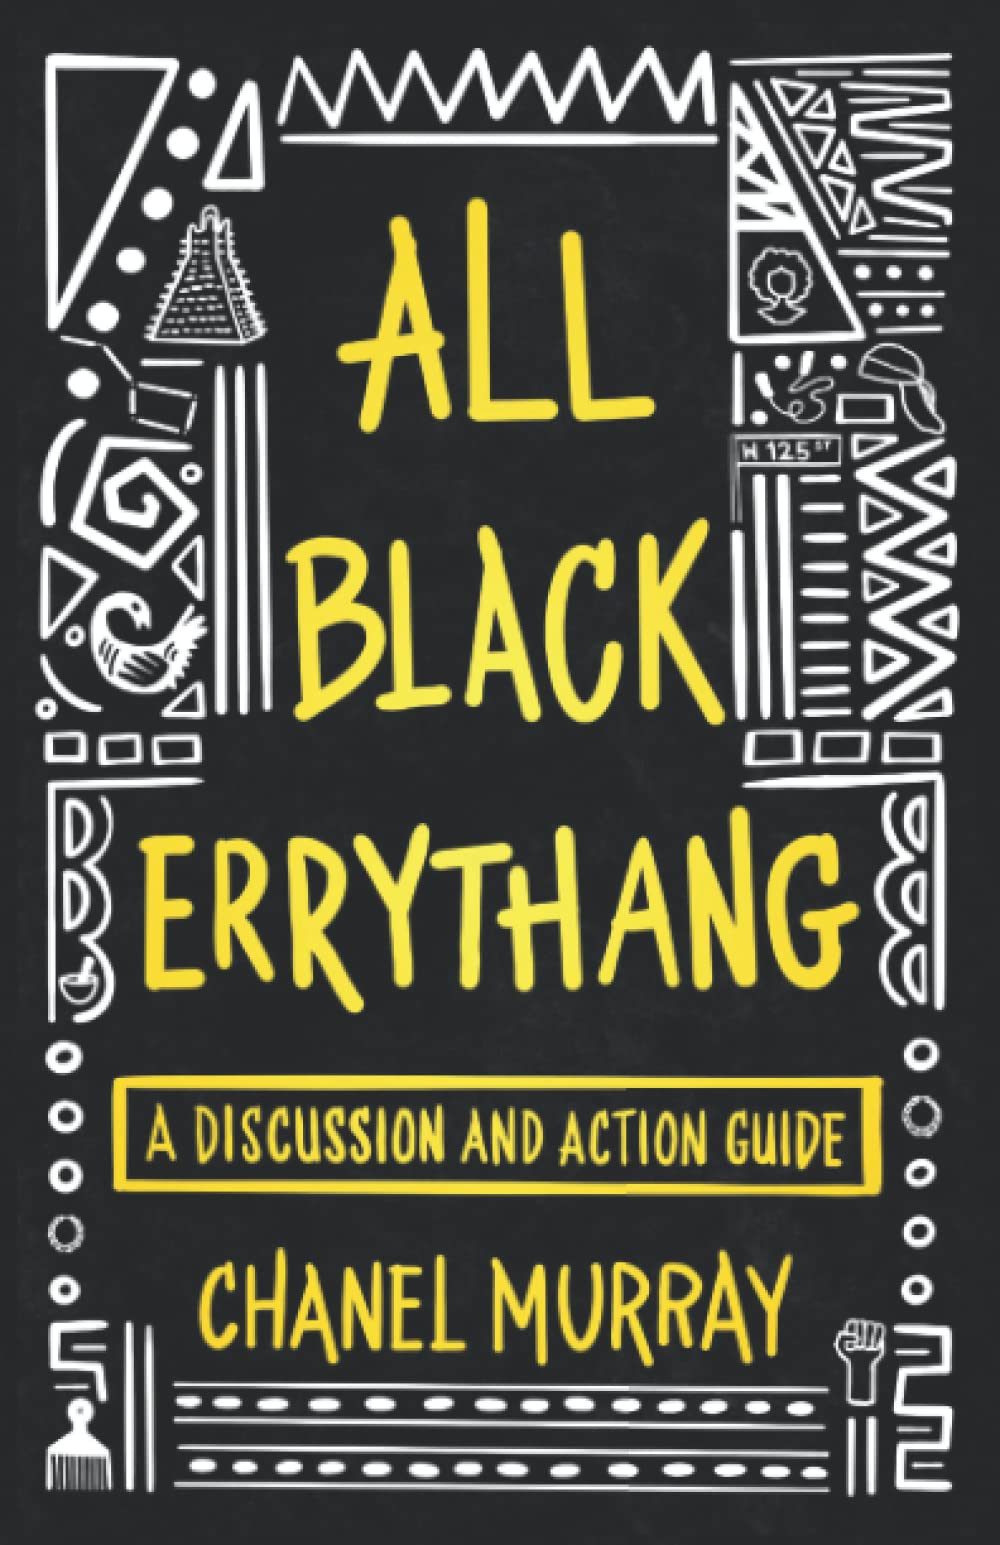 All Black Errythang: A Discussion and Action Guide